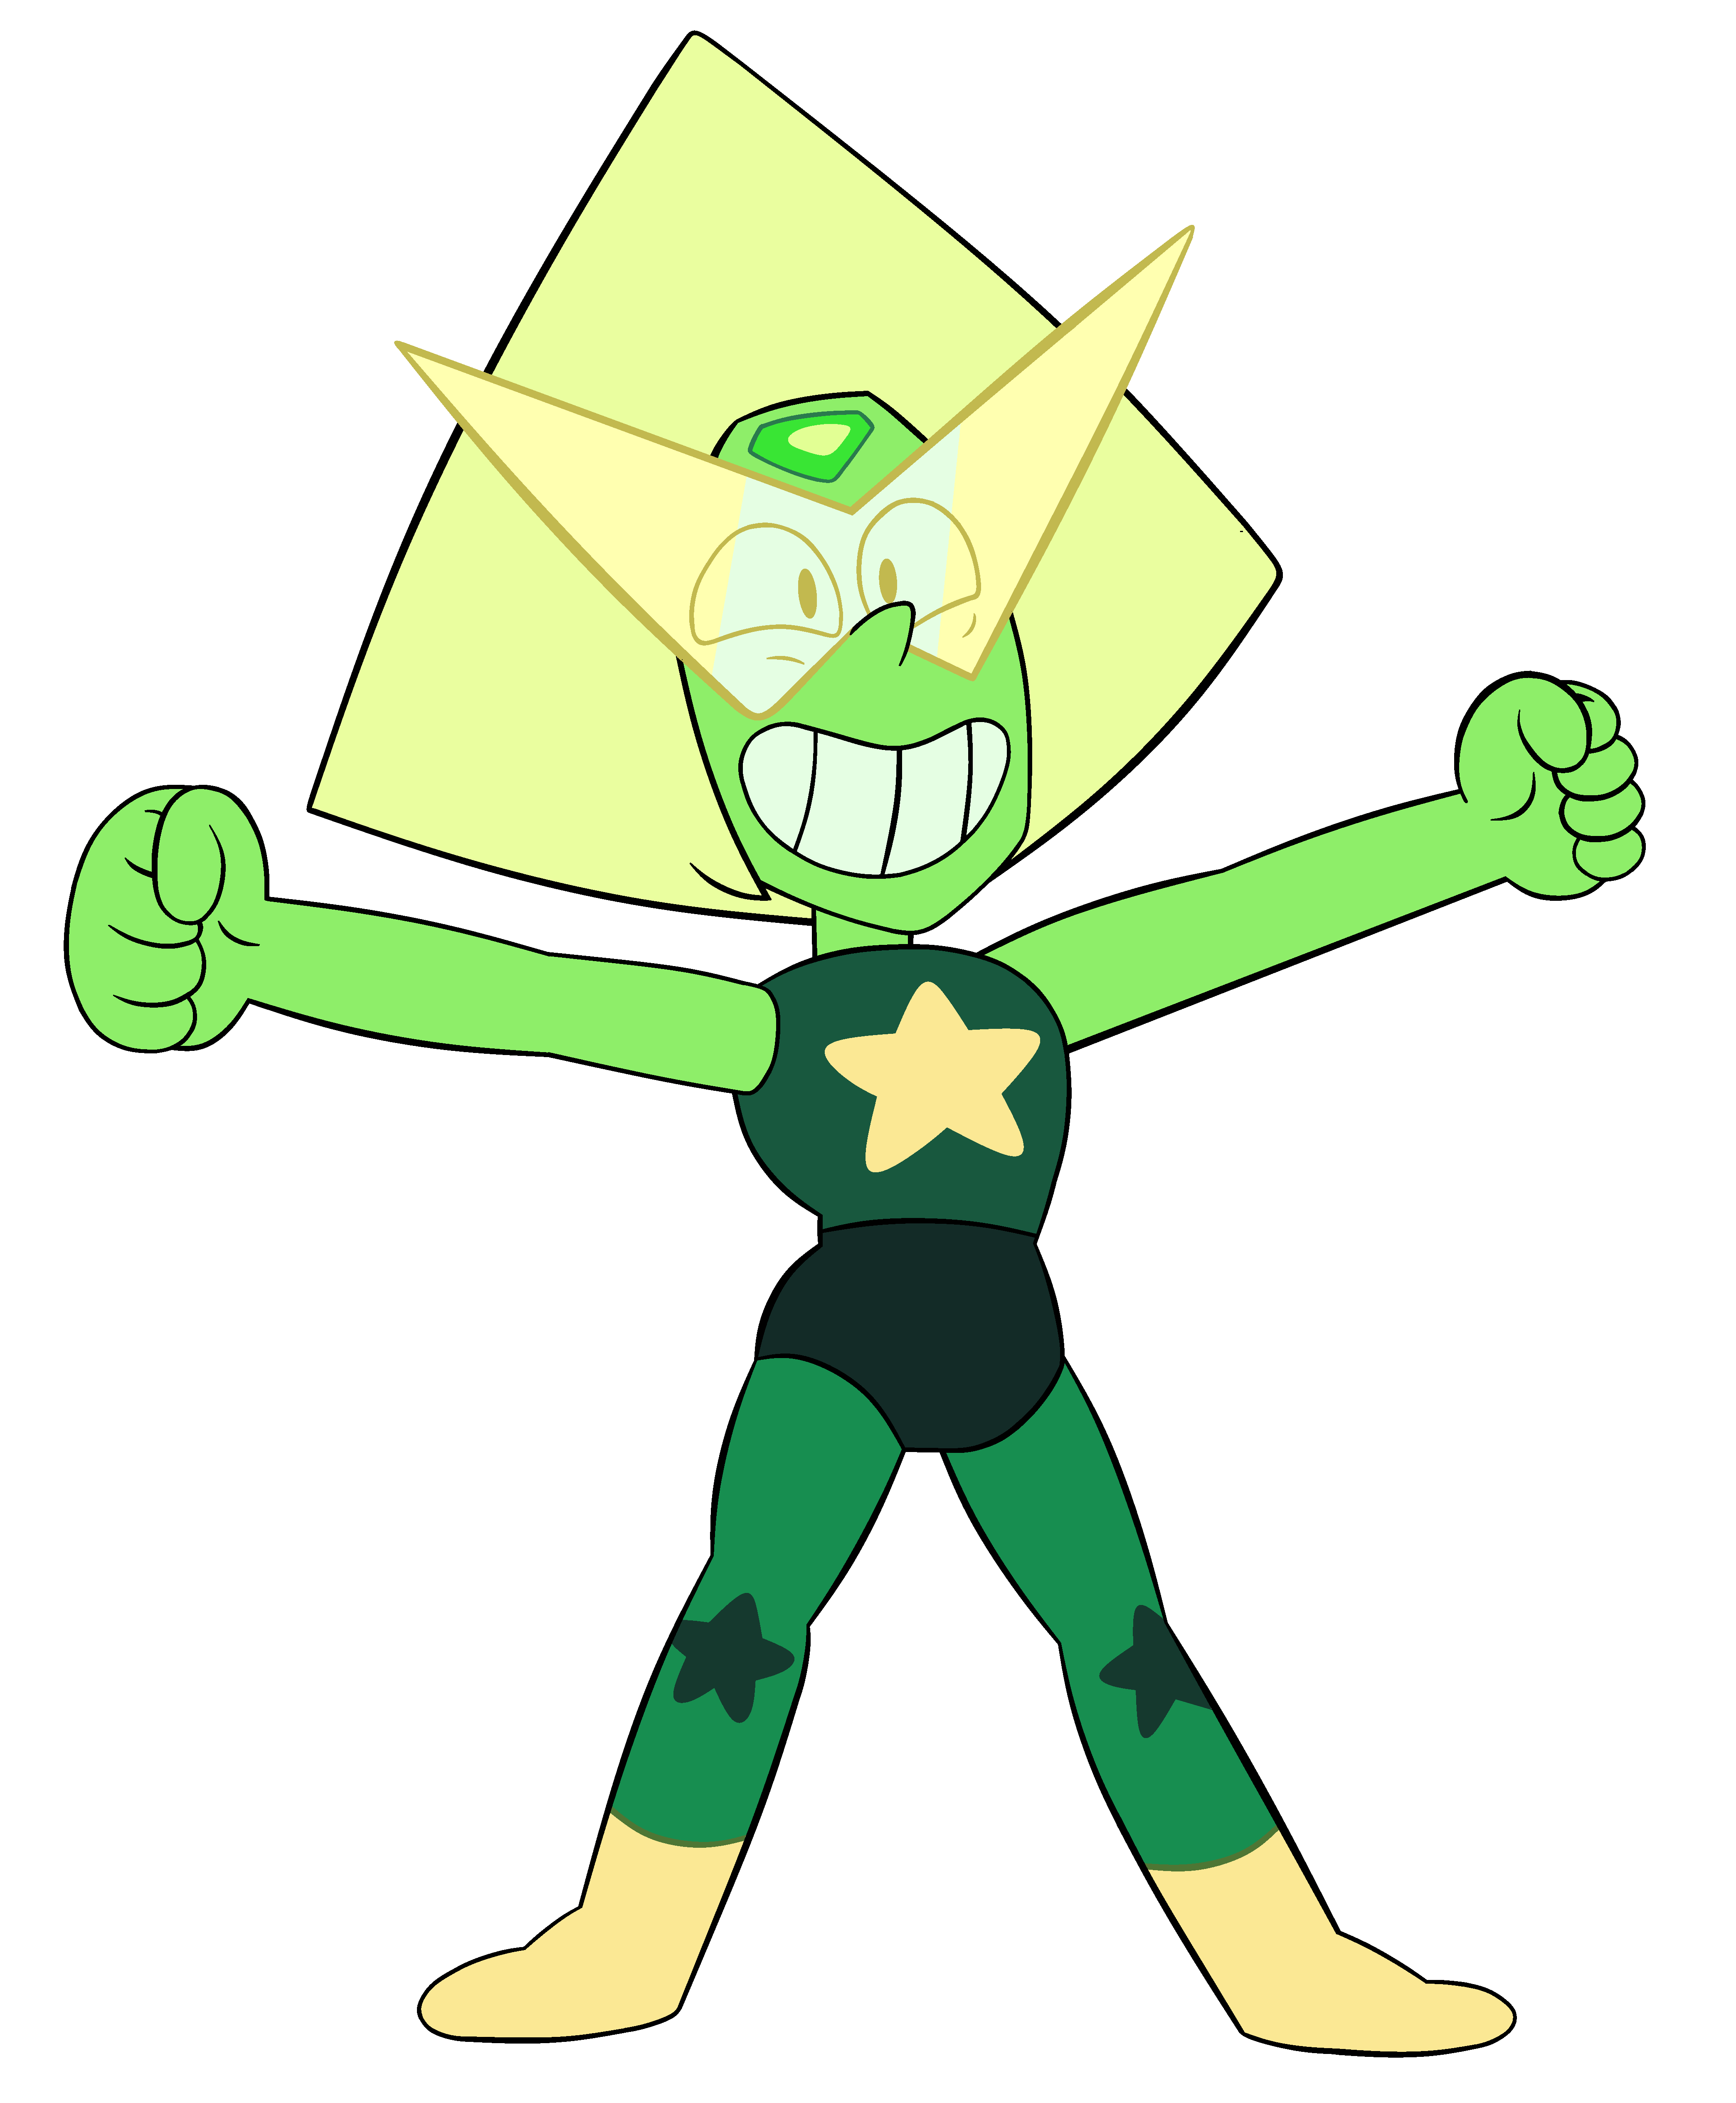 I've been doing this gem art for the past 4 days and half the gems